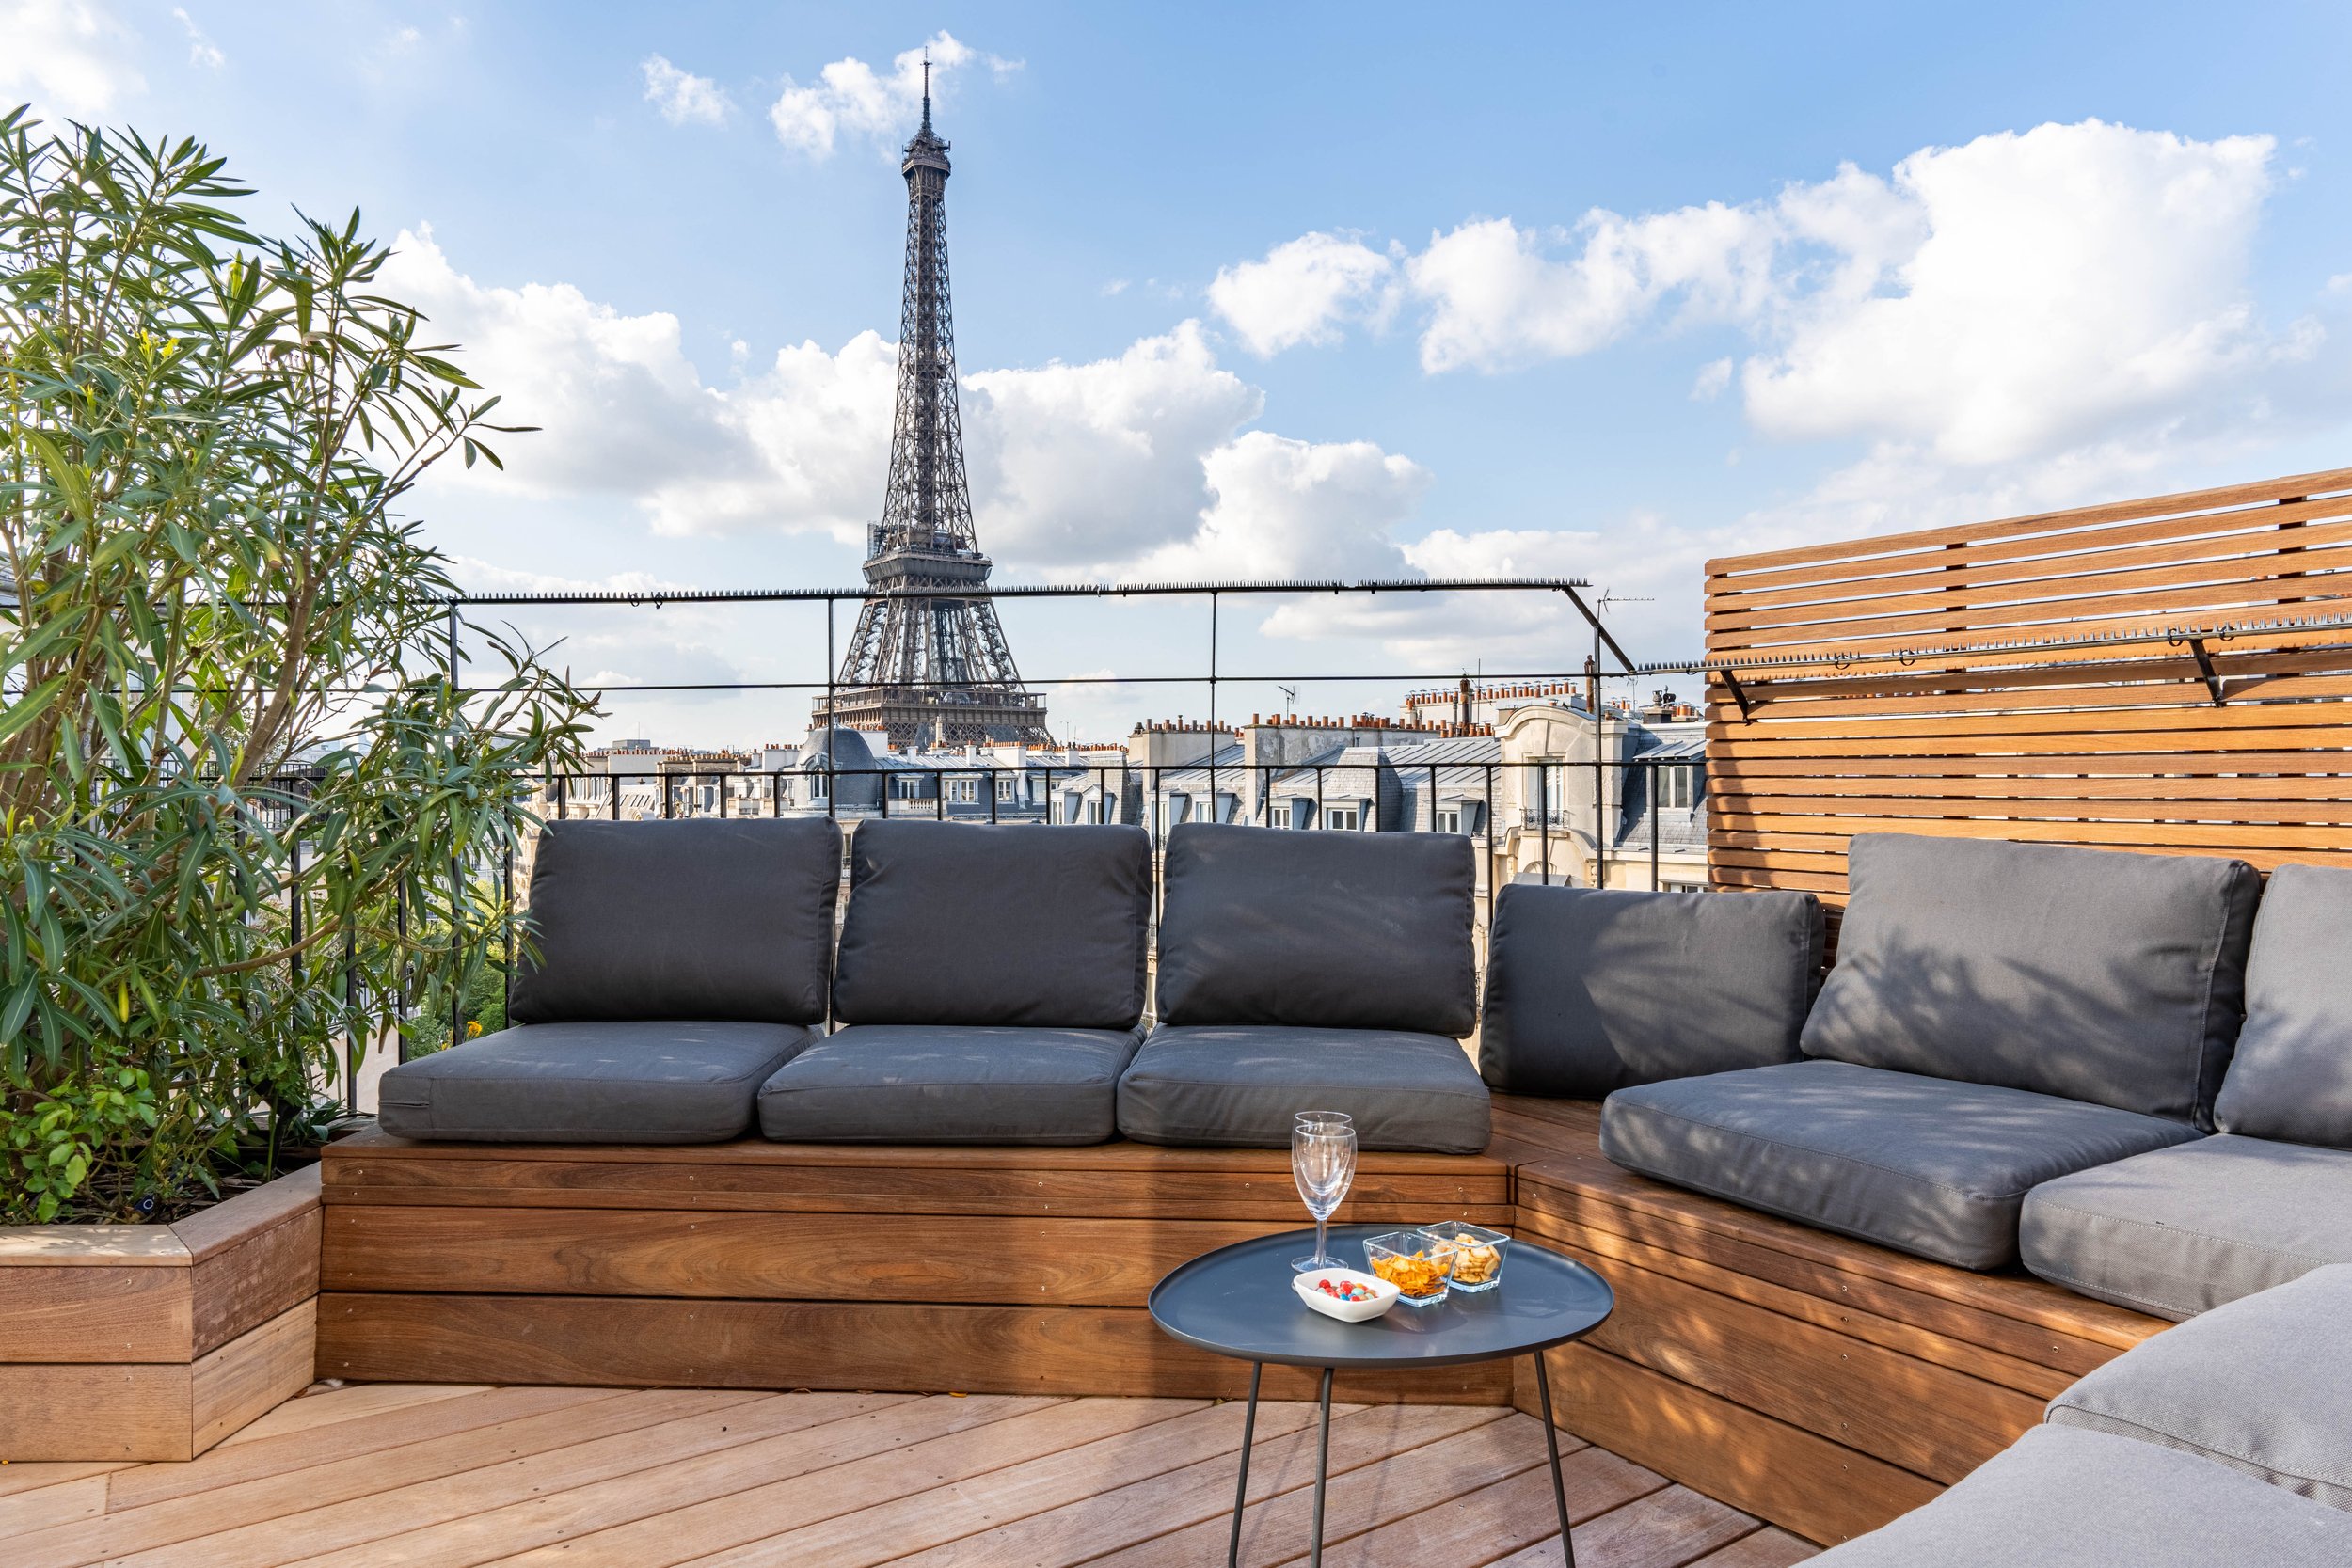 Luxury apartment and rooftop in Paris with view of the Eiffel Tower